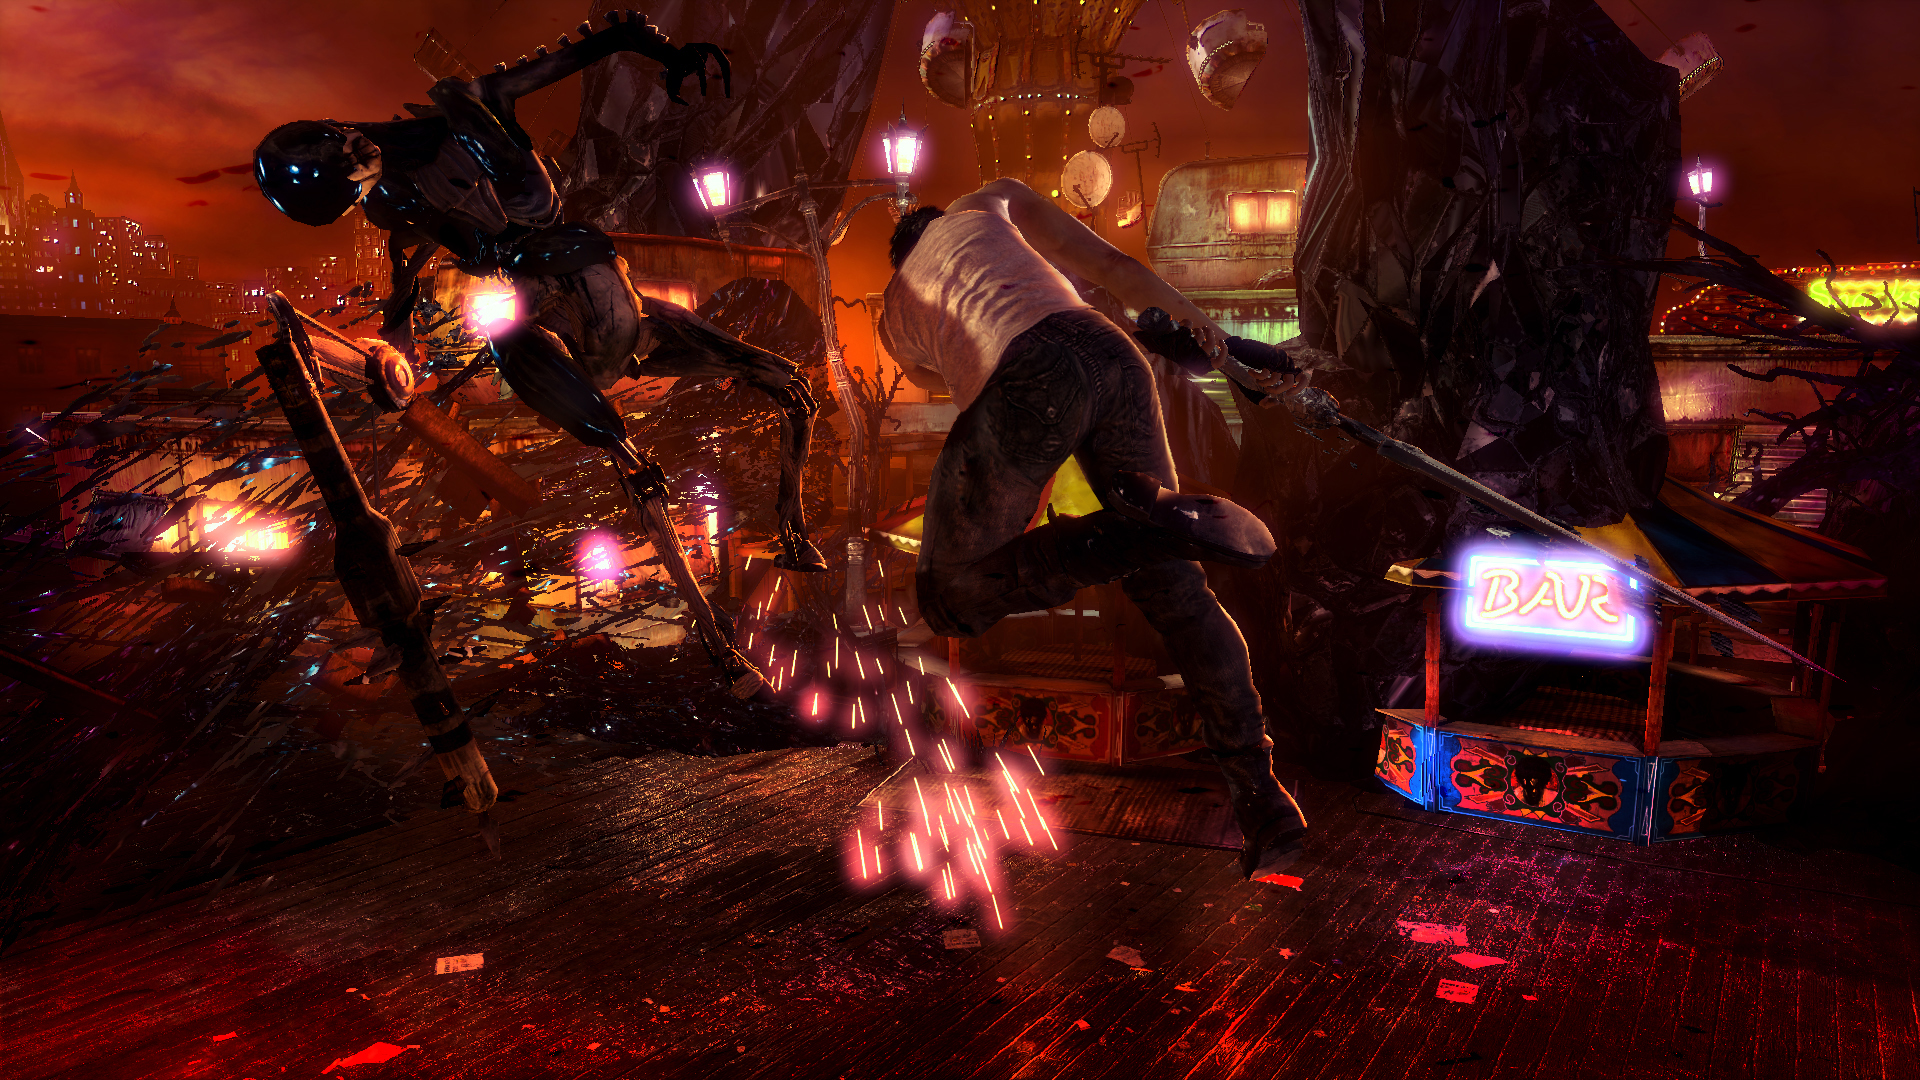 DmC Devil May Cry screenshots show off Dante with new weapons